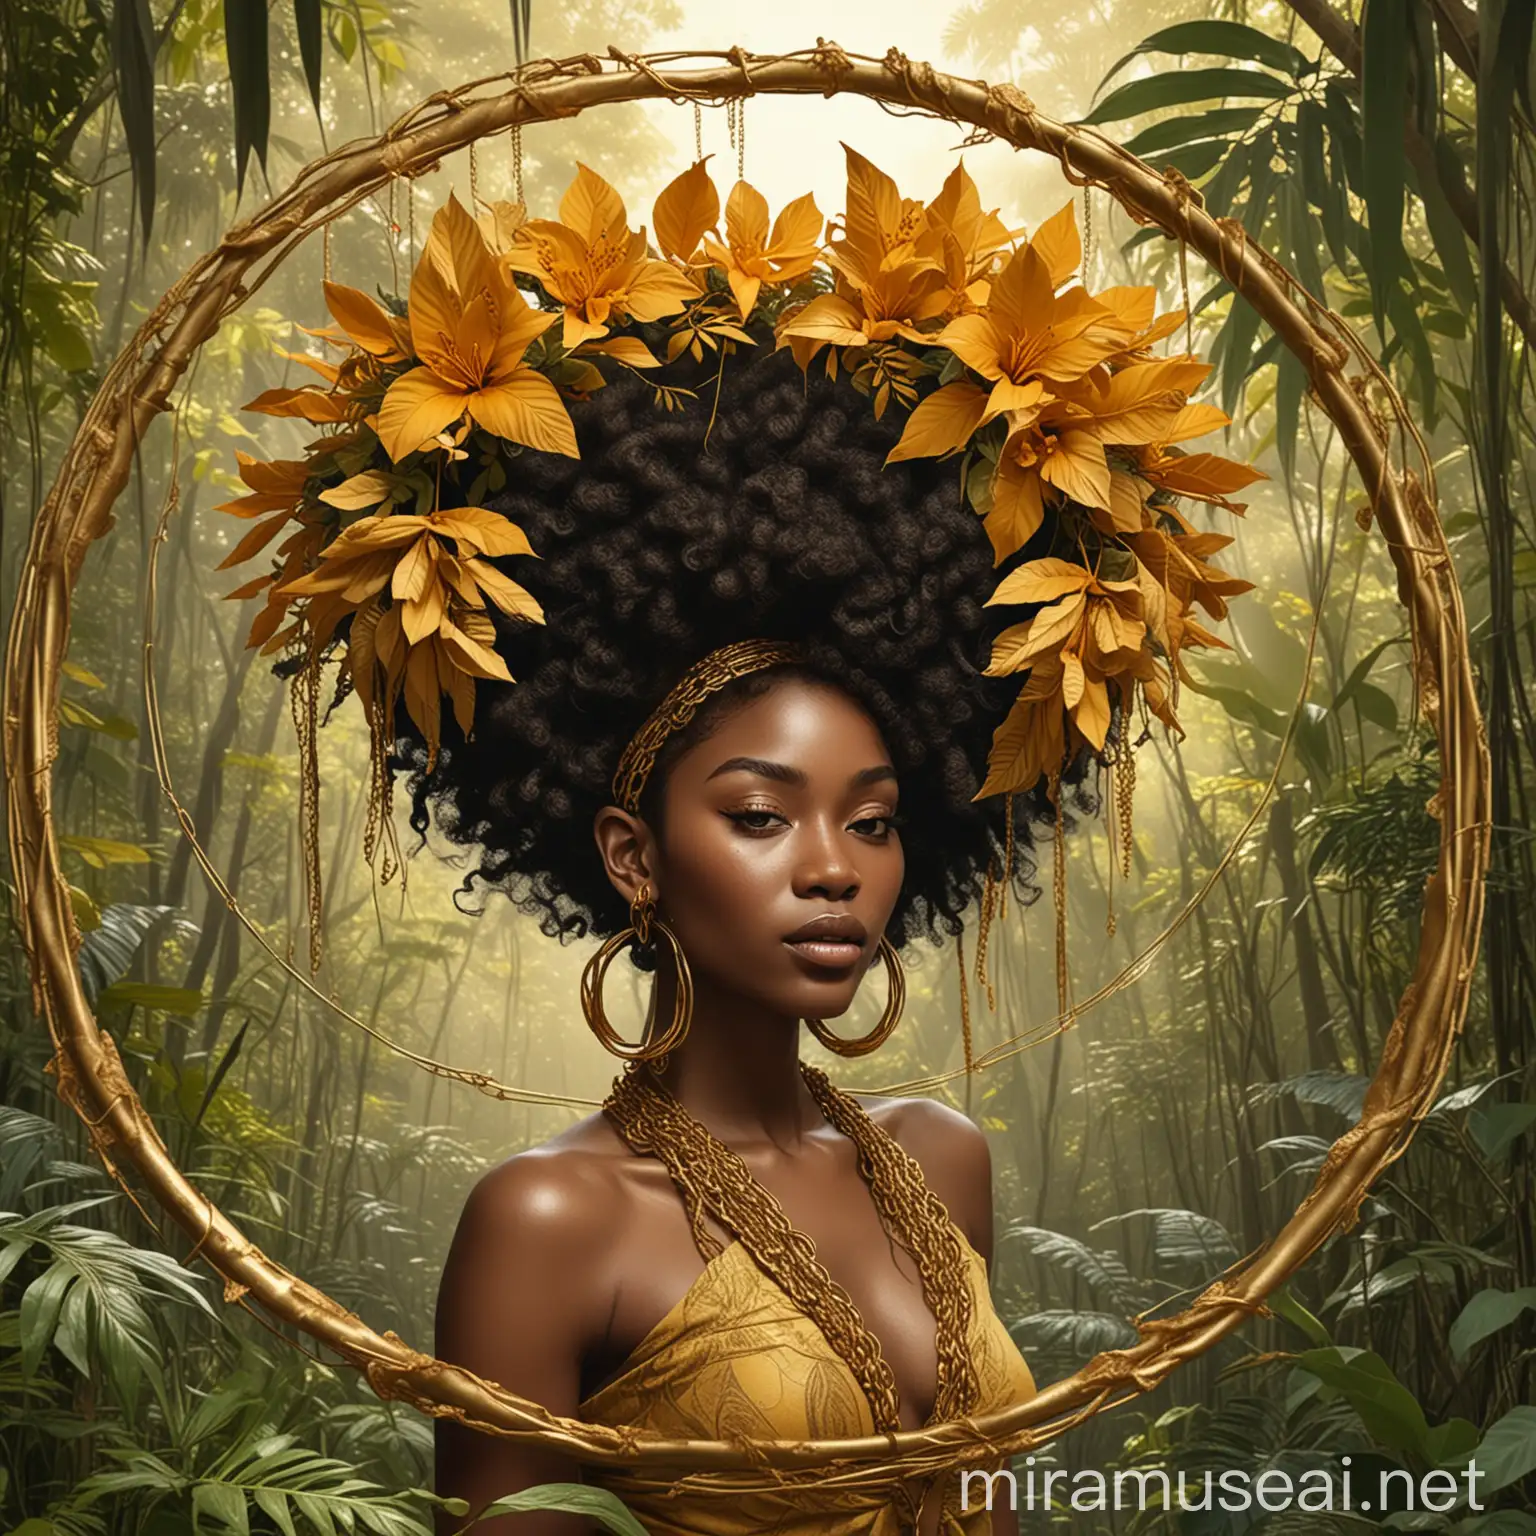 The requested digital collage art will feature an image of a black woman adorned with golden strings in her hair, wearing large golden hoop earrings, standing in the cool breeze of the jungle with her head held high, enjoying the infinite freedom and power she feels within. The color palette I have in mind for this design includes:  Golden Jewel Color: 